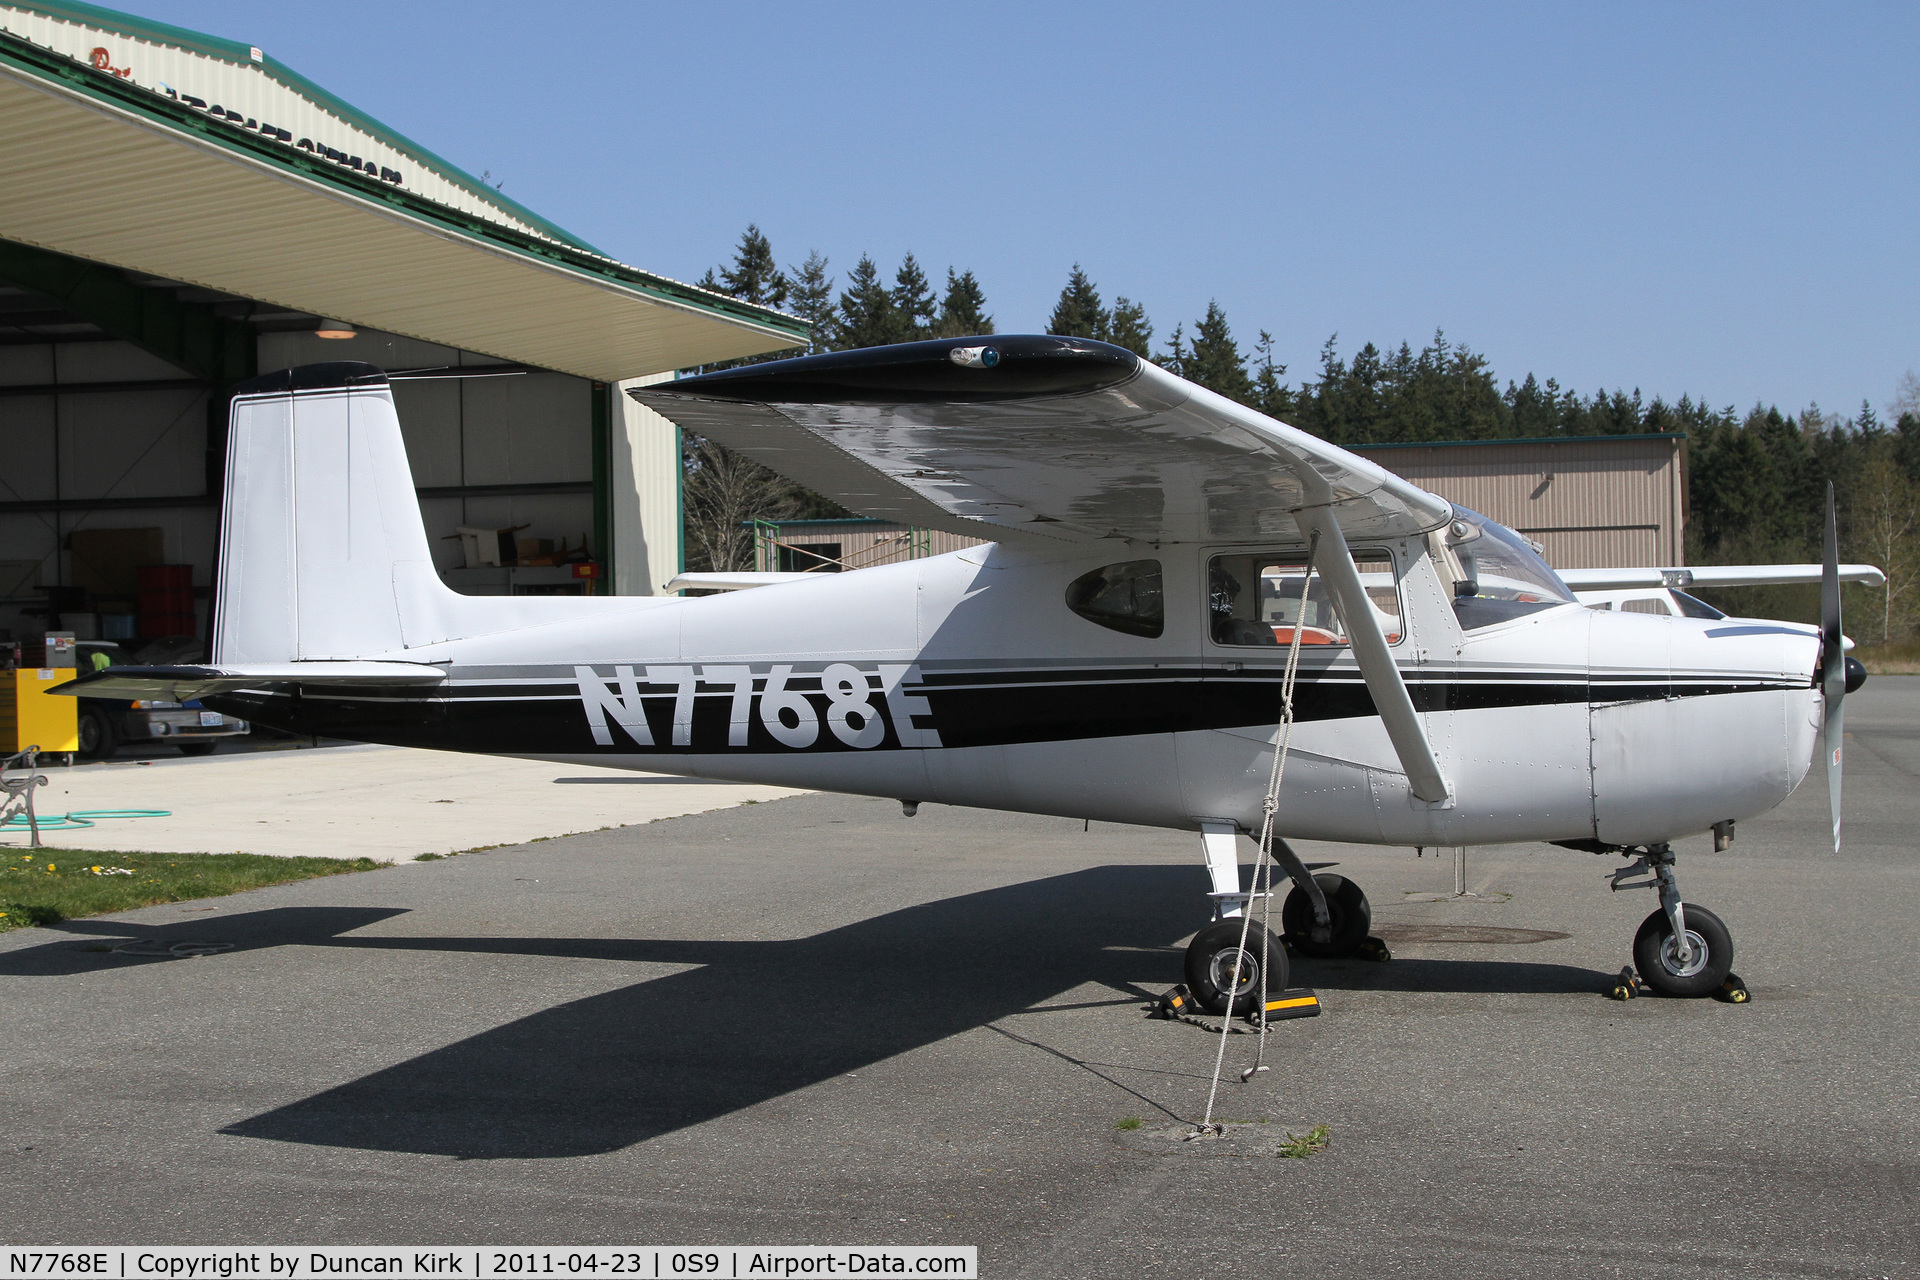 N7768E, 1959 Cessna 150 C/N 17568, This old Cessna 150 sits on the ramp at Port Townsend/Jefferson County